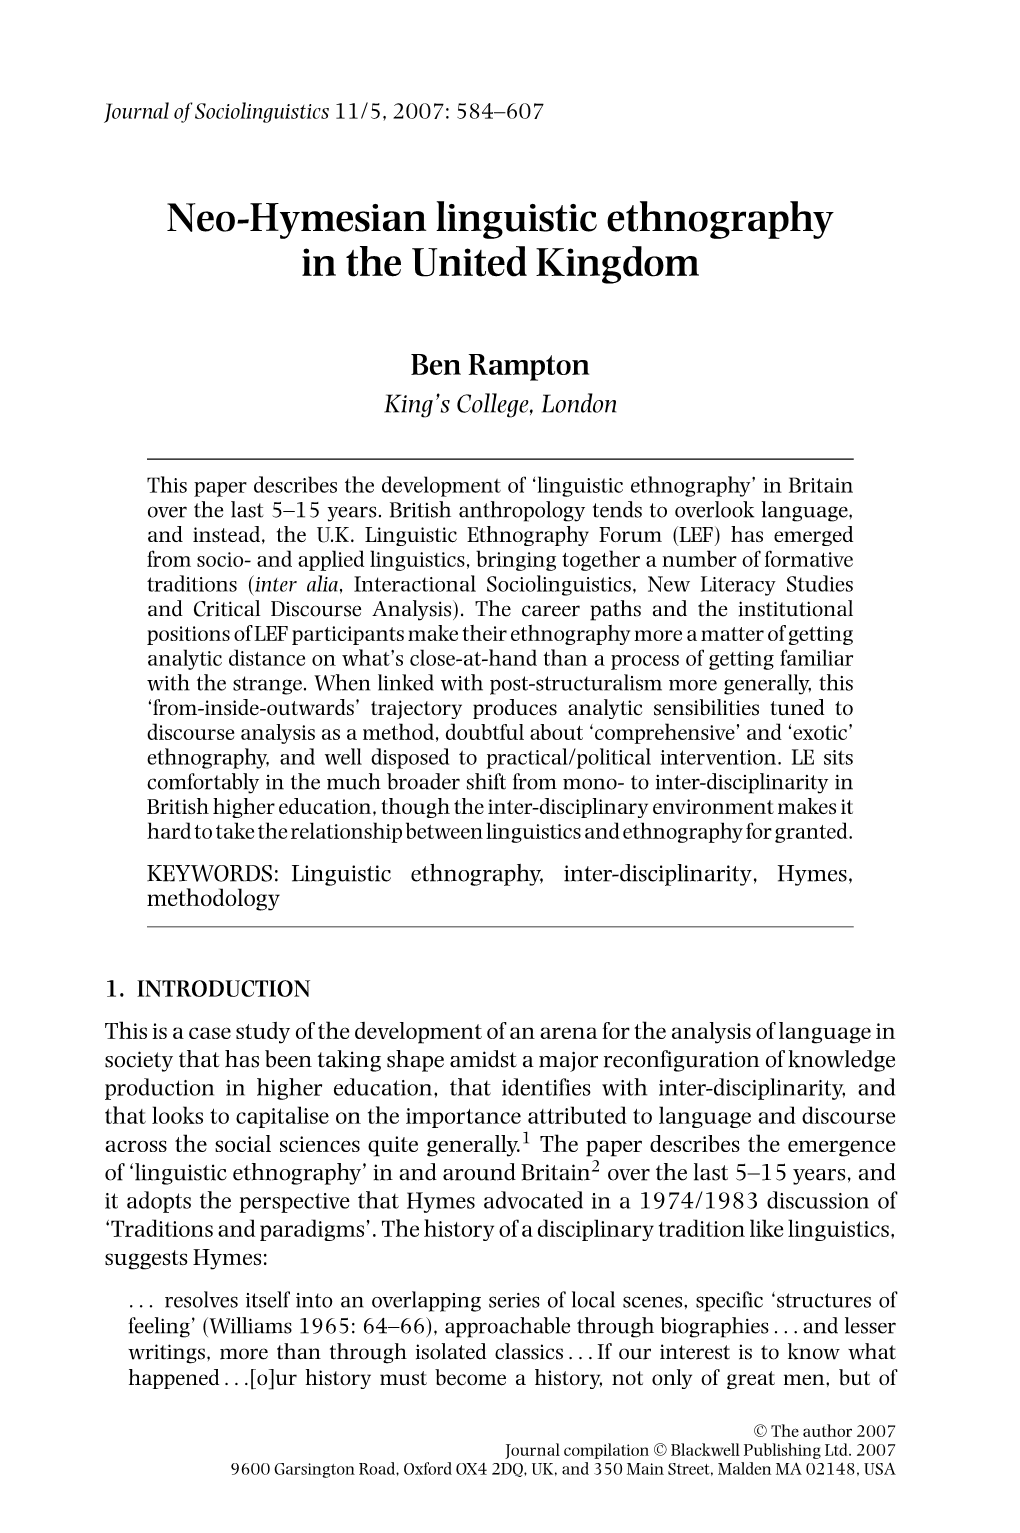 Neo-Hymesian Linguistic Ethnography in the United Kingdom